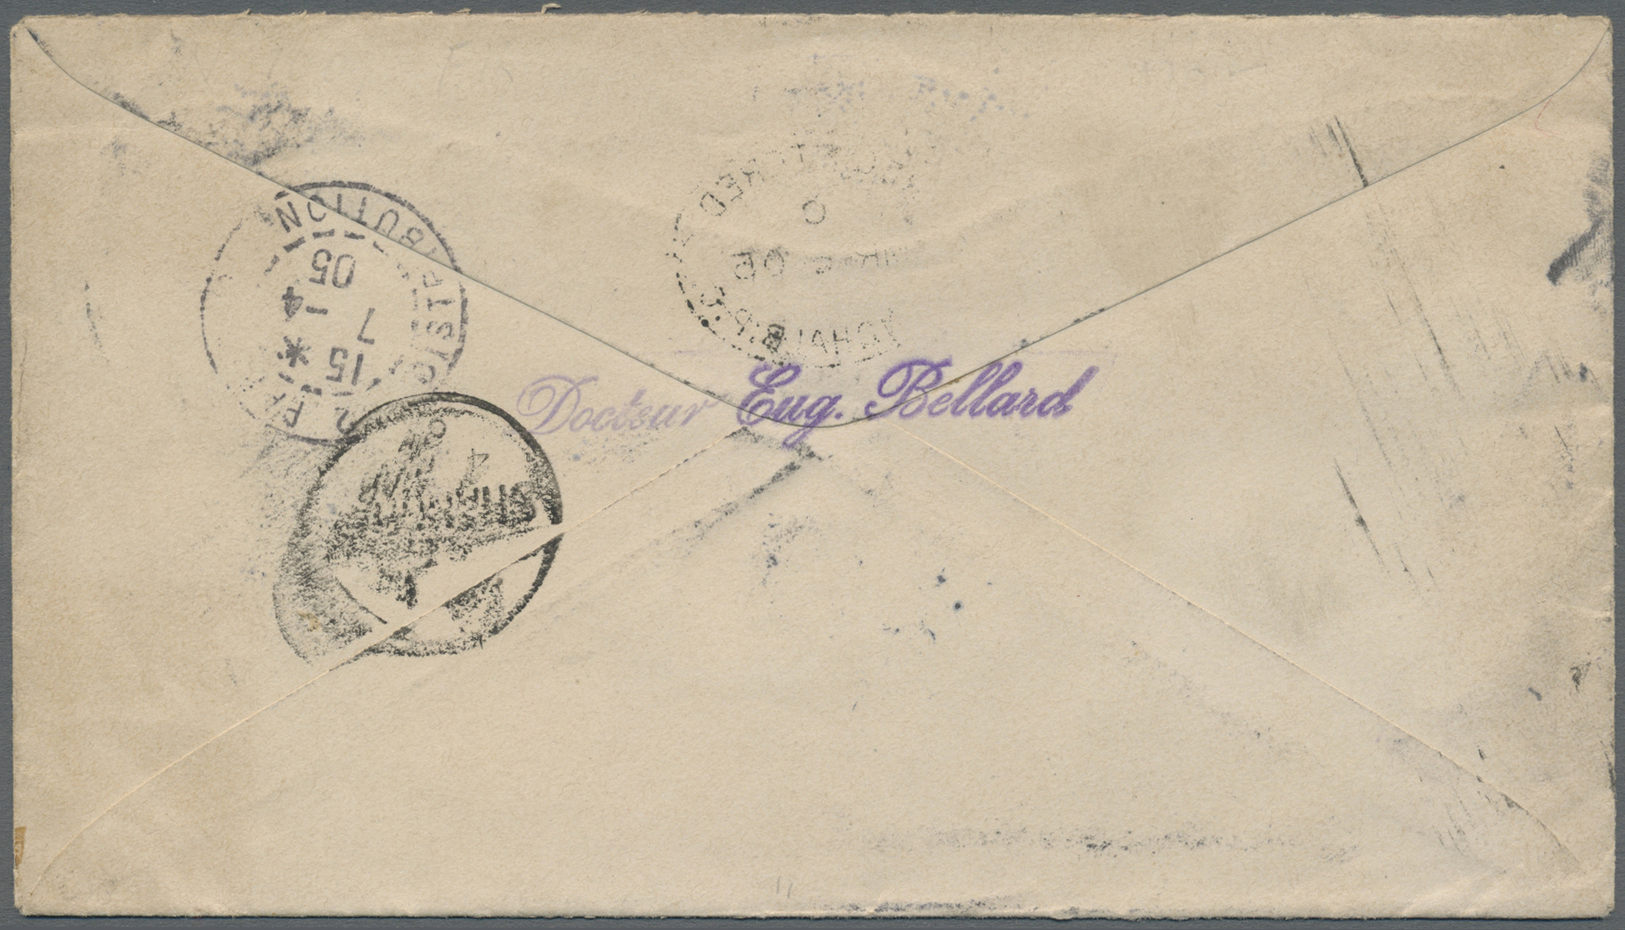 Br Hongkong - Britische Post In China: 1905. Registered Envelope Addressed To France Bearing Chinese Imperial Post SG 11 - Lettres & Documents